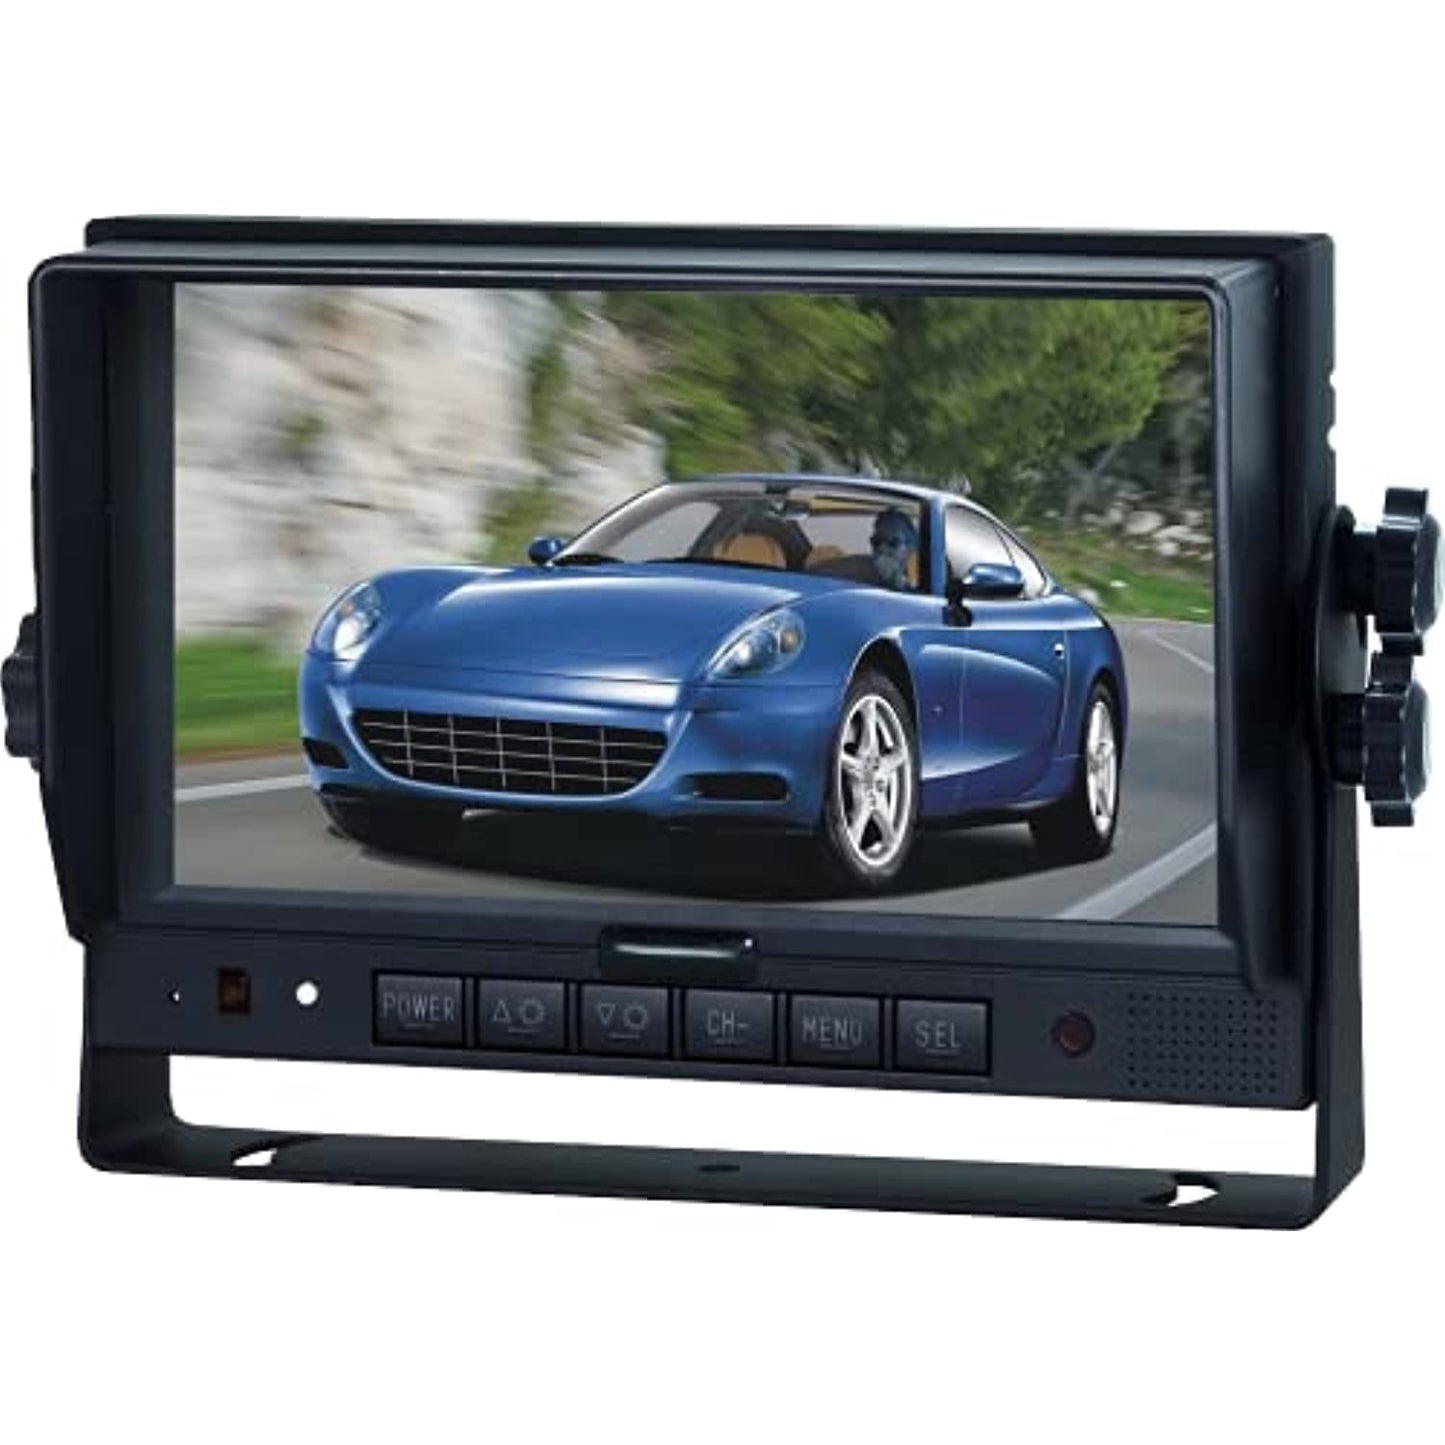 RYDEEN M7020WKR 7-Inch Monitor with CM-R1000W Camera ,35feet Extension Cable